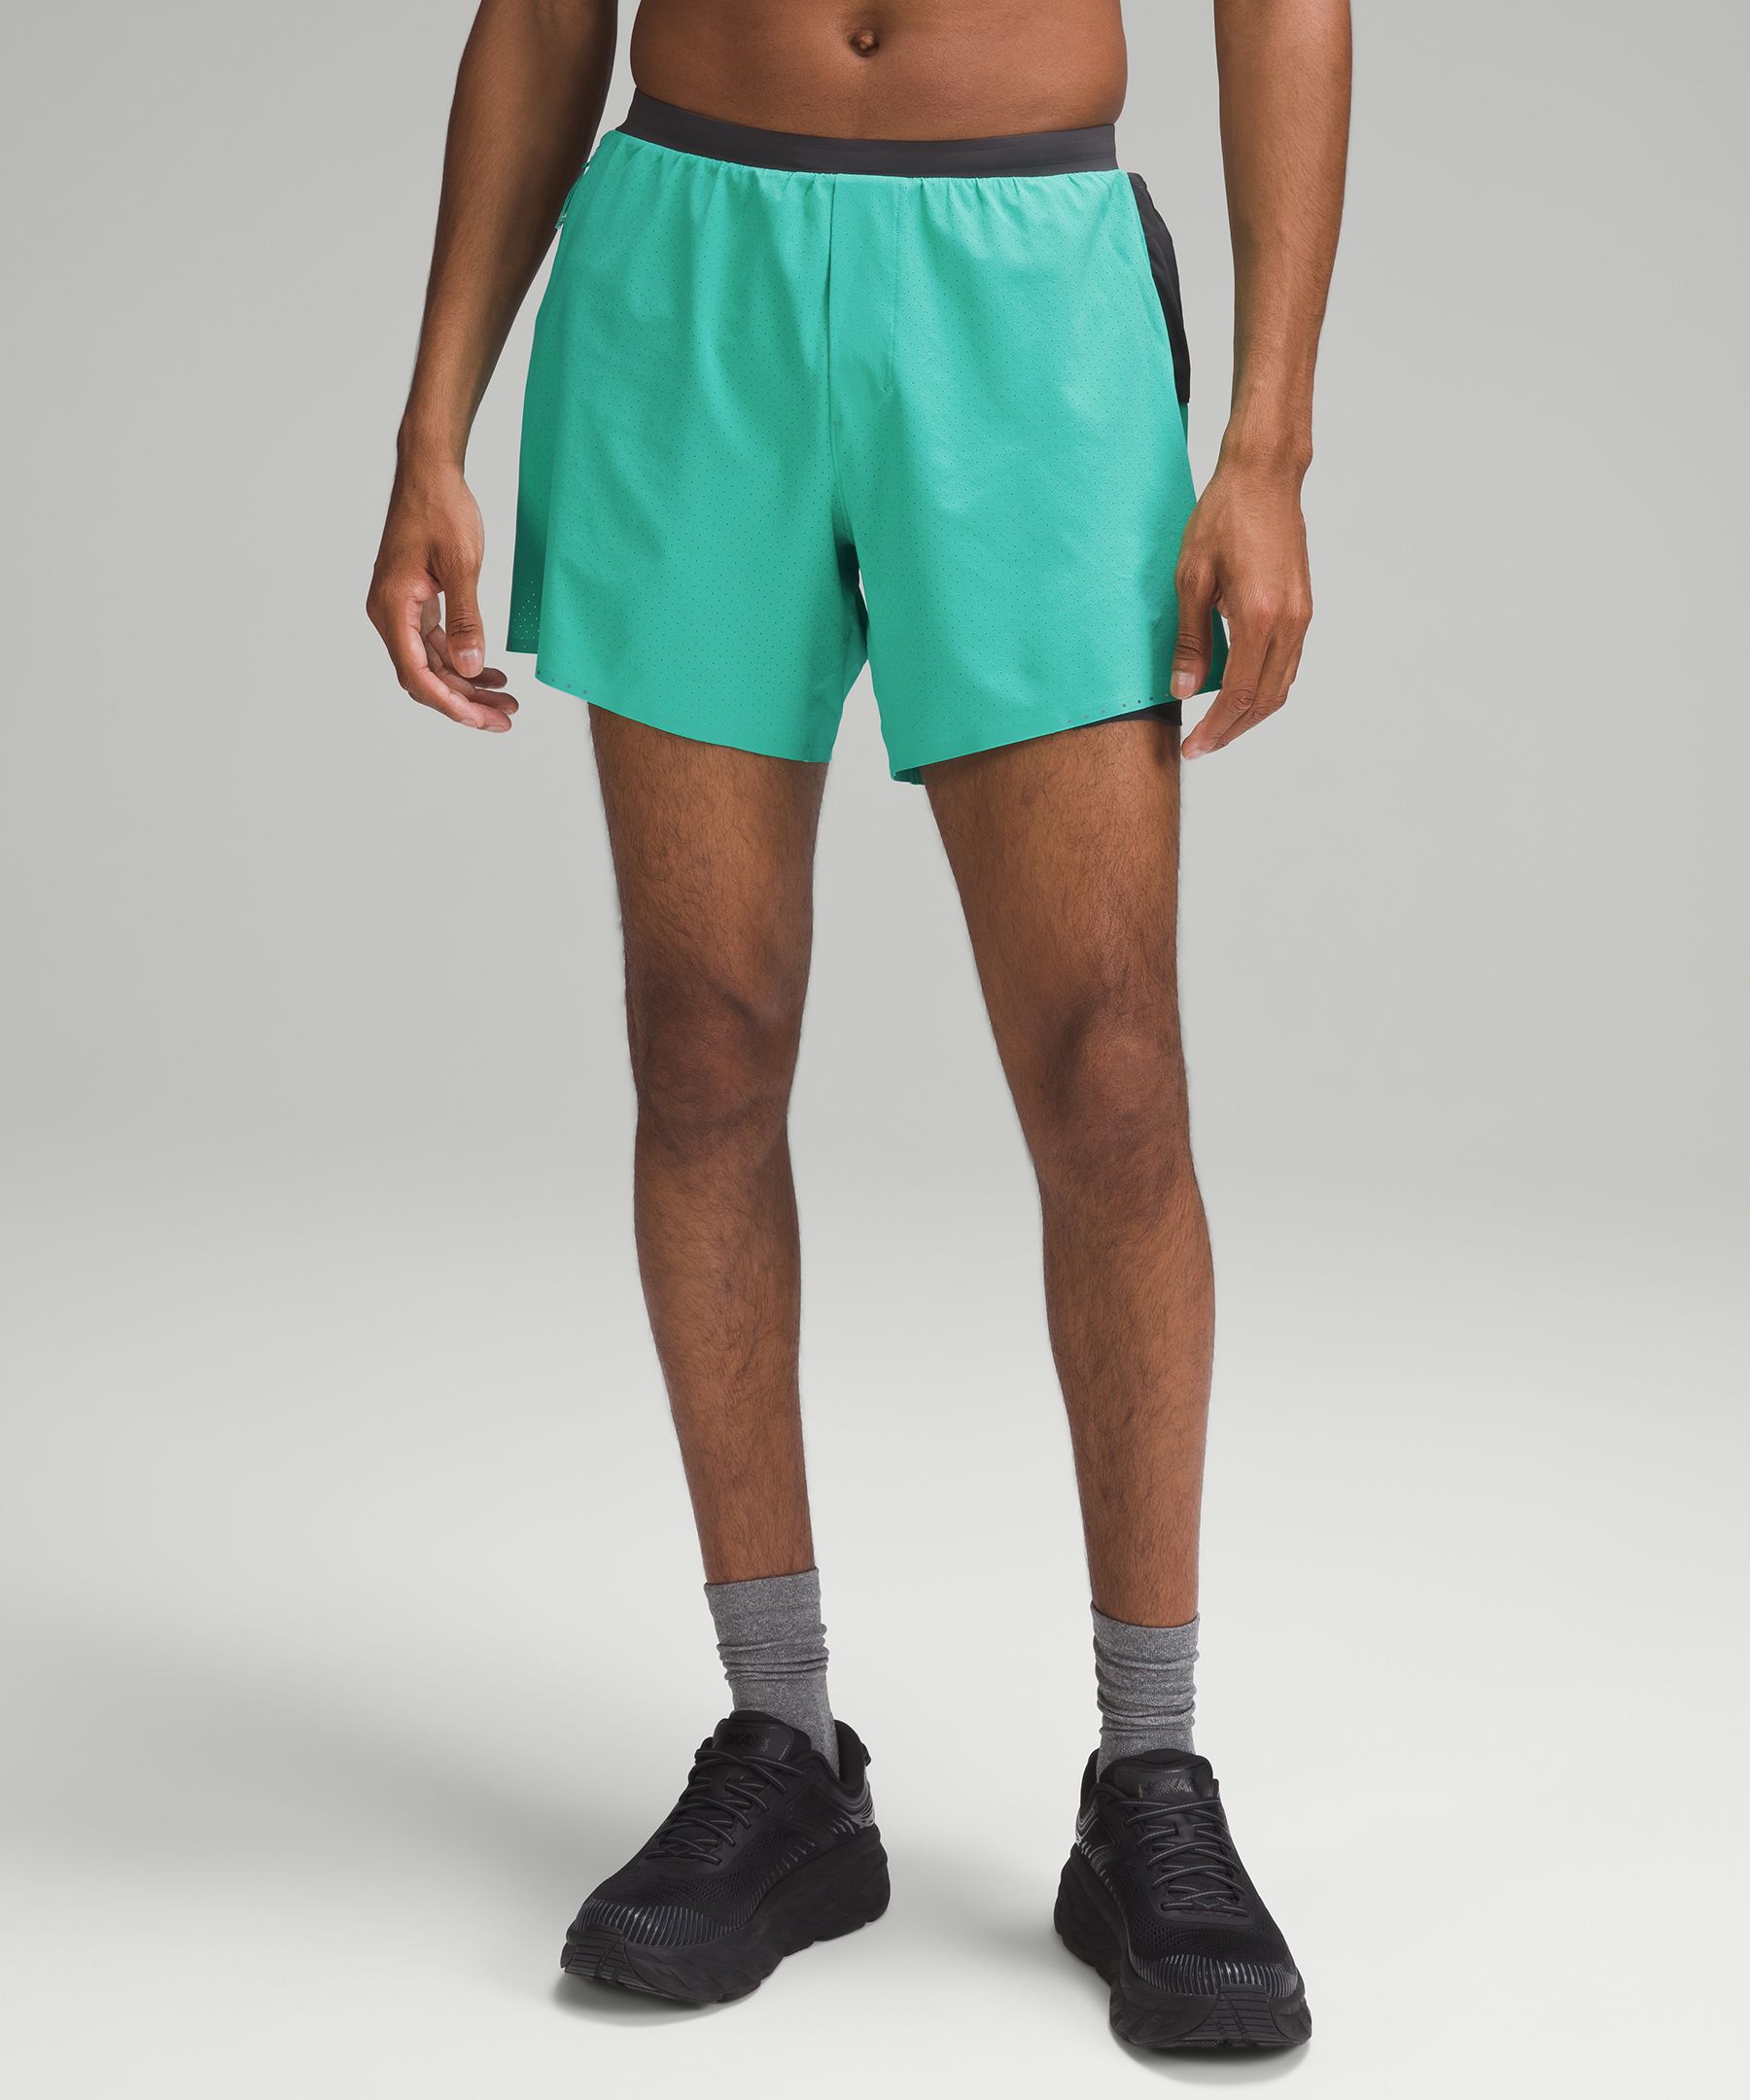 Fast and Free Road to Trail Lined Short 6, Men's Shorts